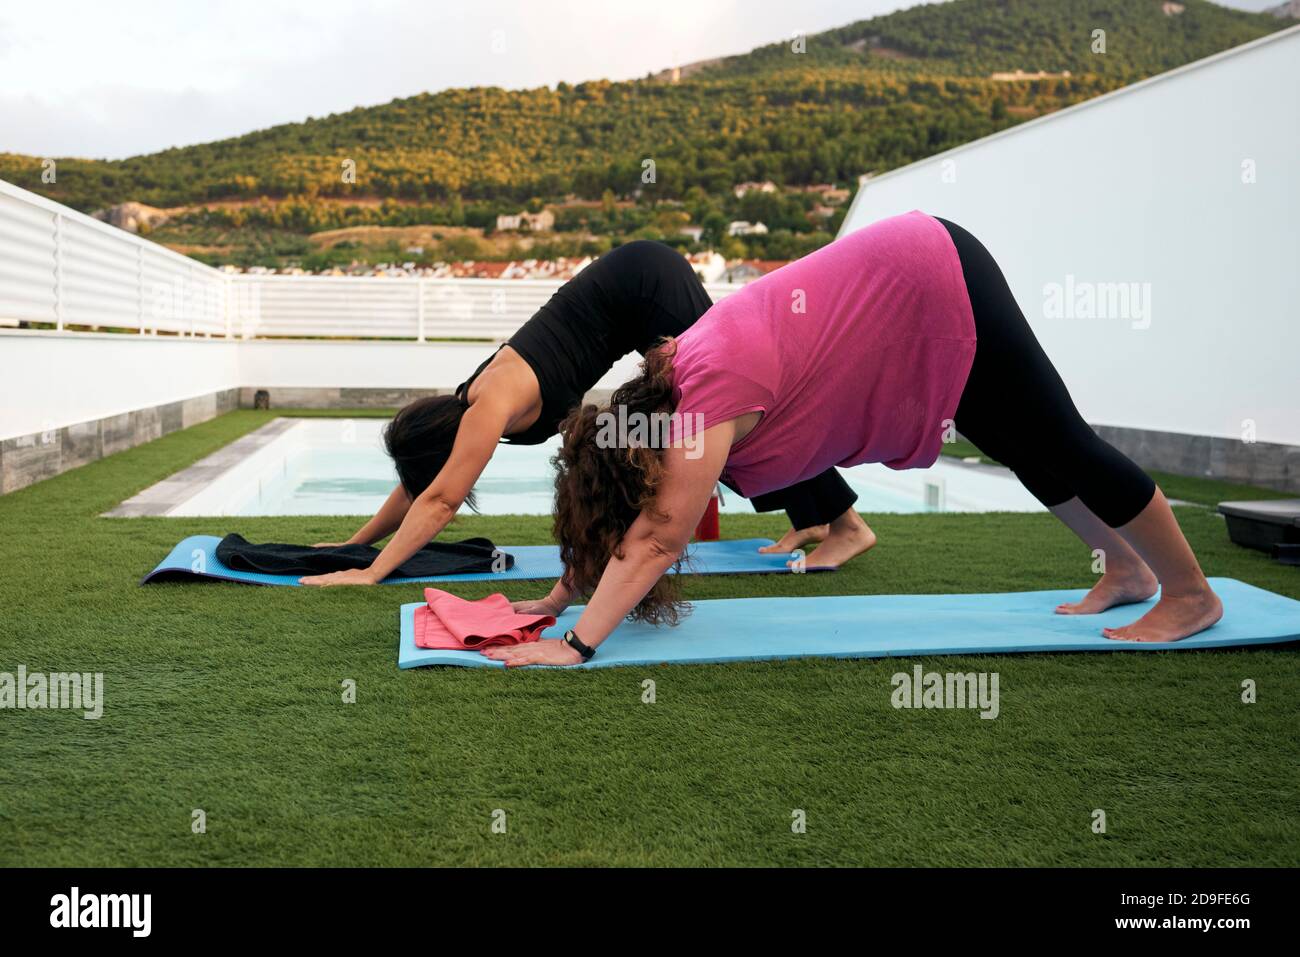 women do yoga on the terrace of the house, face down dog posture Stock Photo